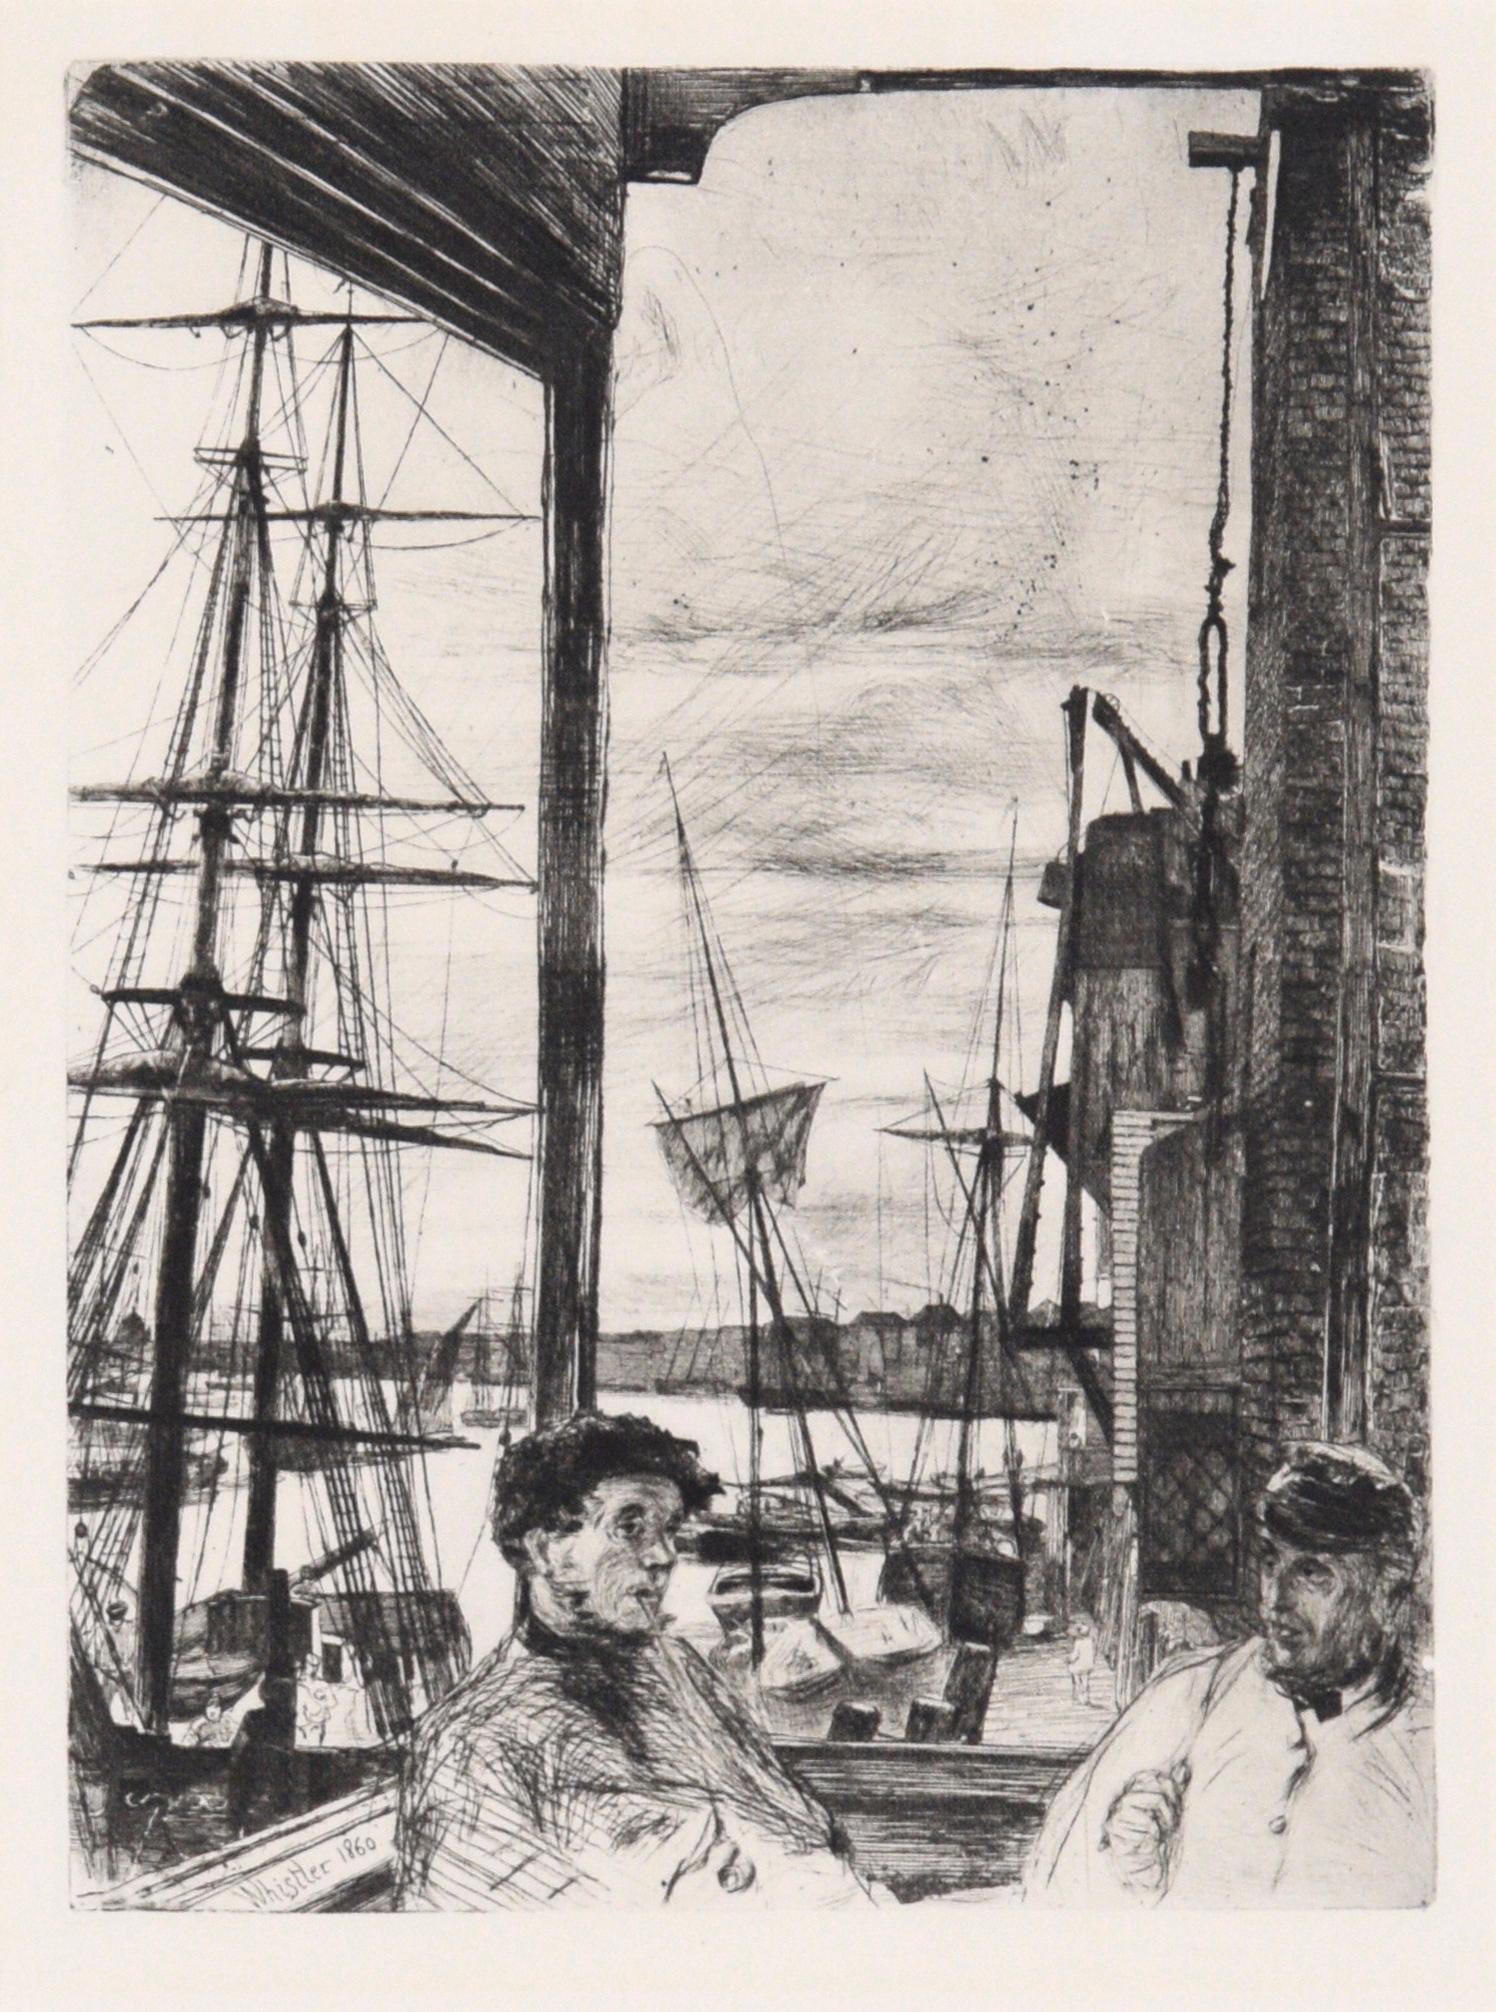 Rotherhithe (Wapping) - Drypoint Etching - Print by James Abbott McNeill Whistler